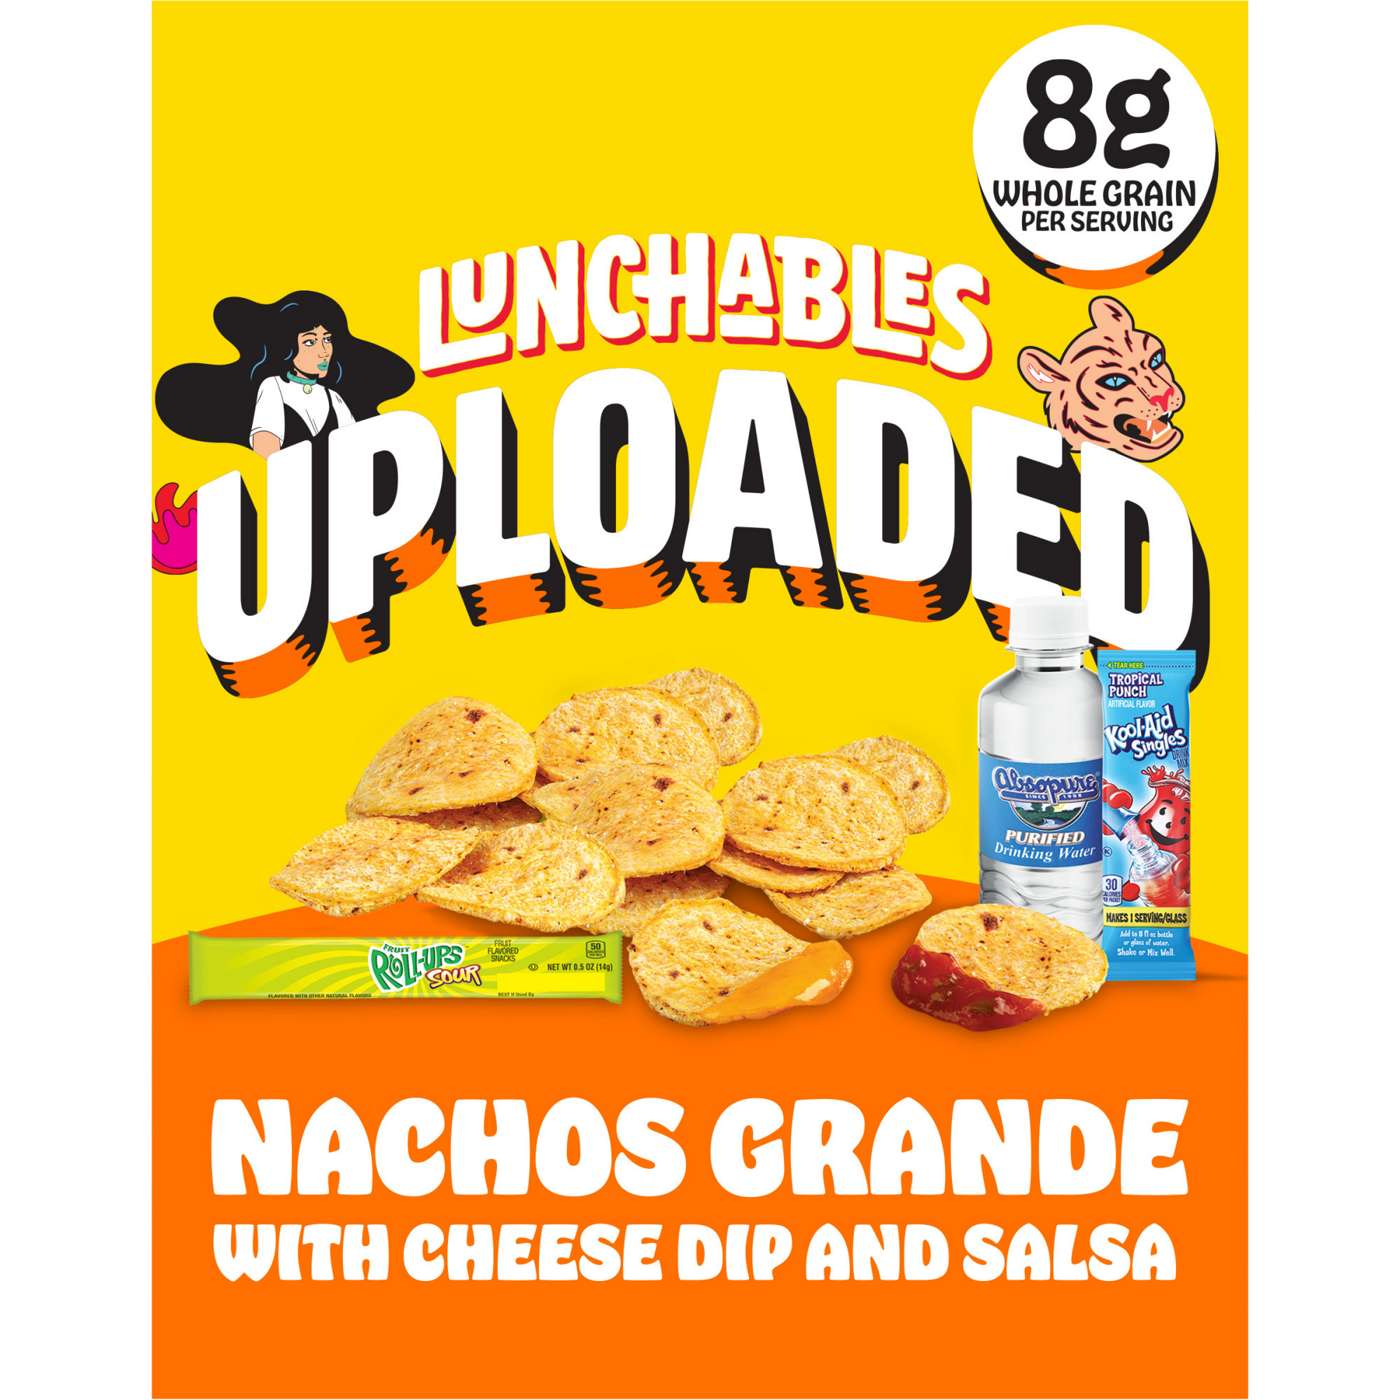 Lunchables Uploaded Meal Kit - Nachos Grande with Cheese Dip & Salsa; image 1 of 5